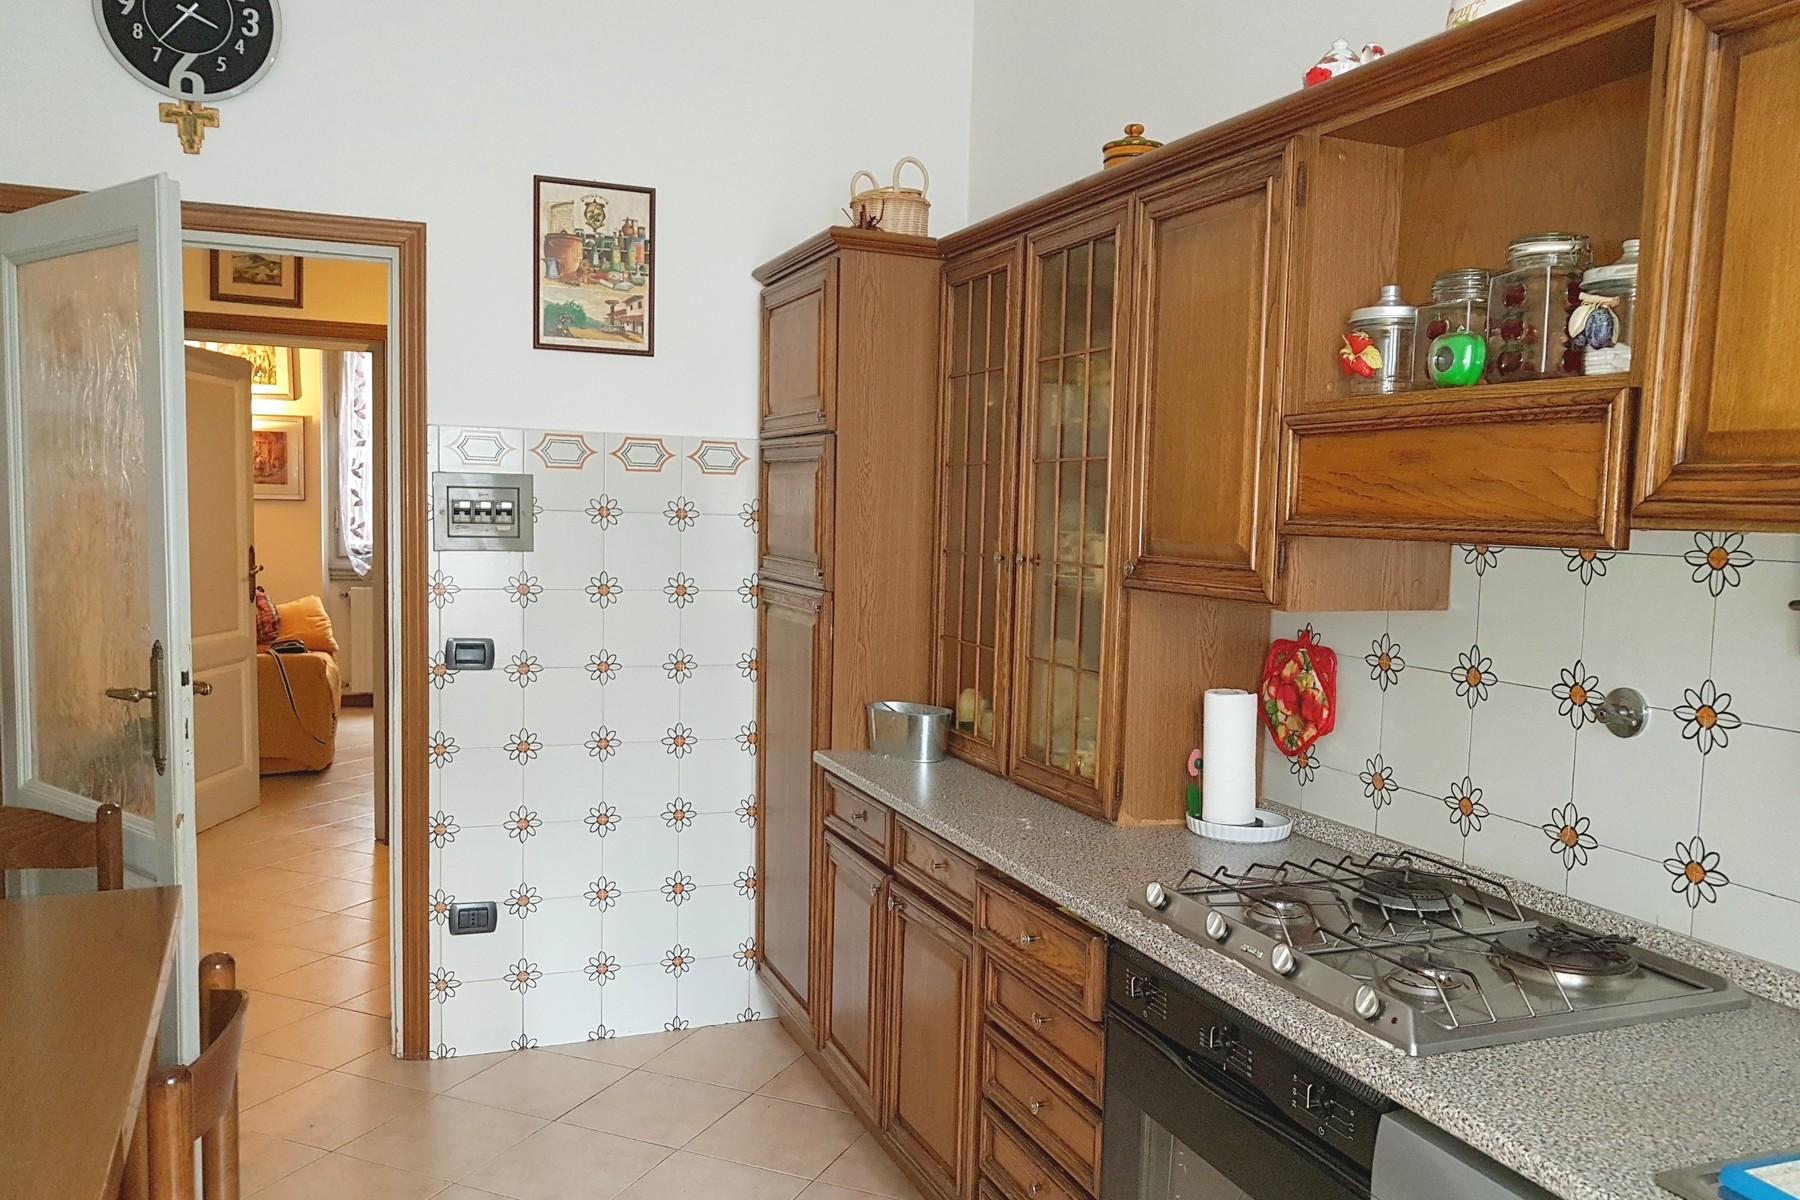 2 bedroom apartment in a quiet residential area - 8